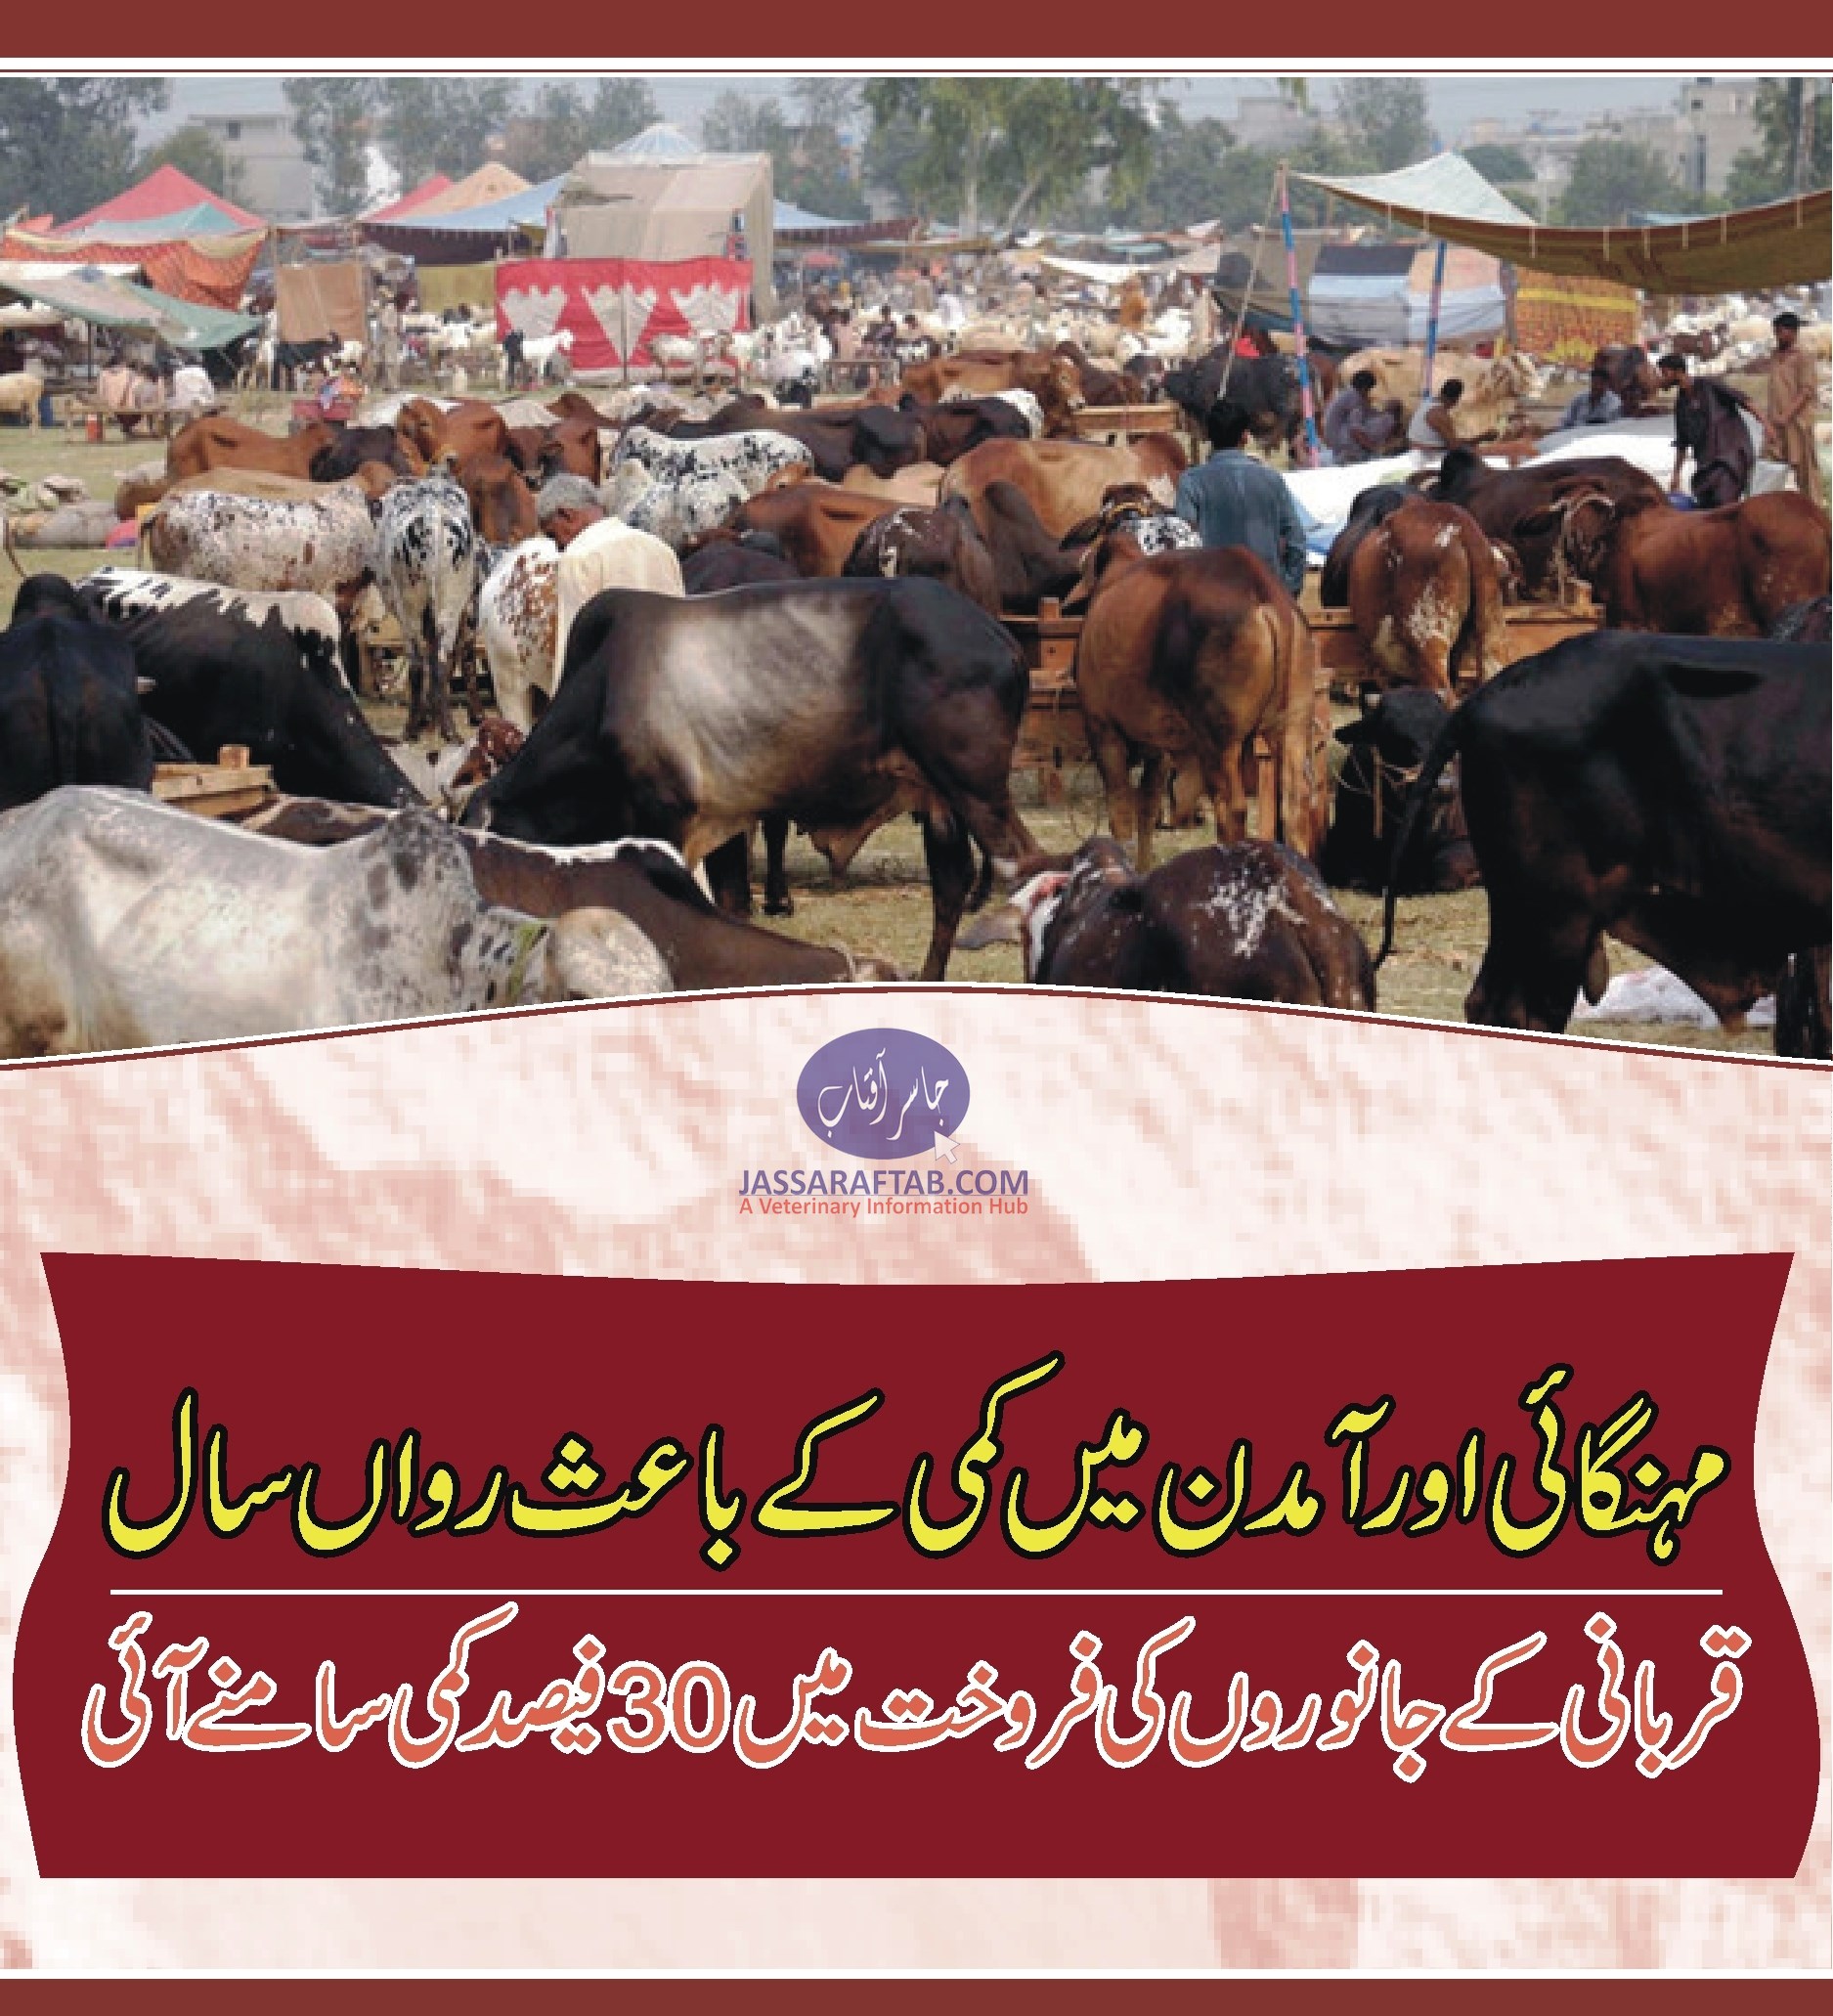 Sale of sacrifcial animals declined by 30 percent